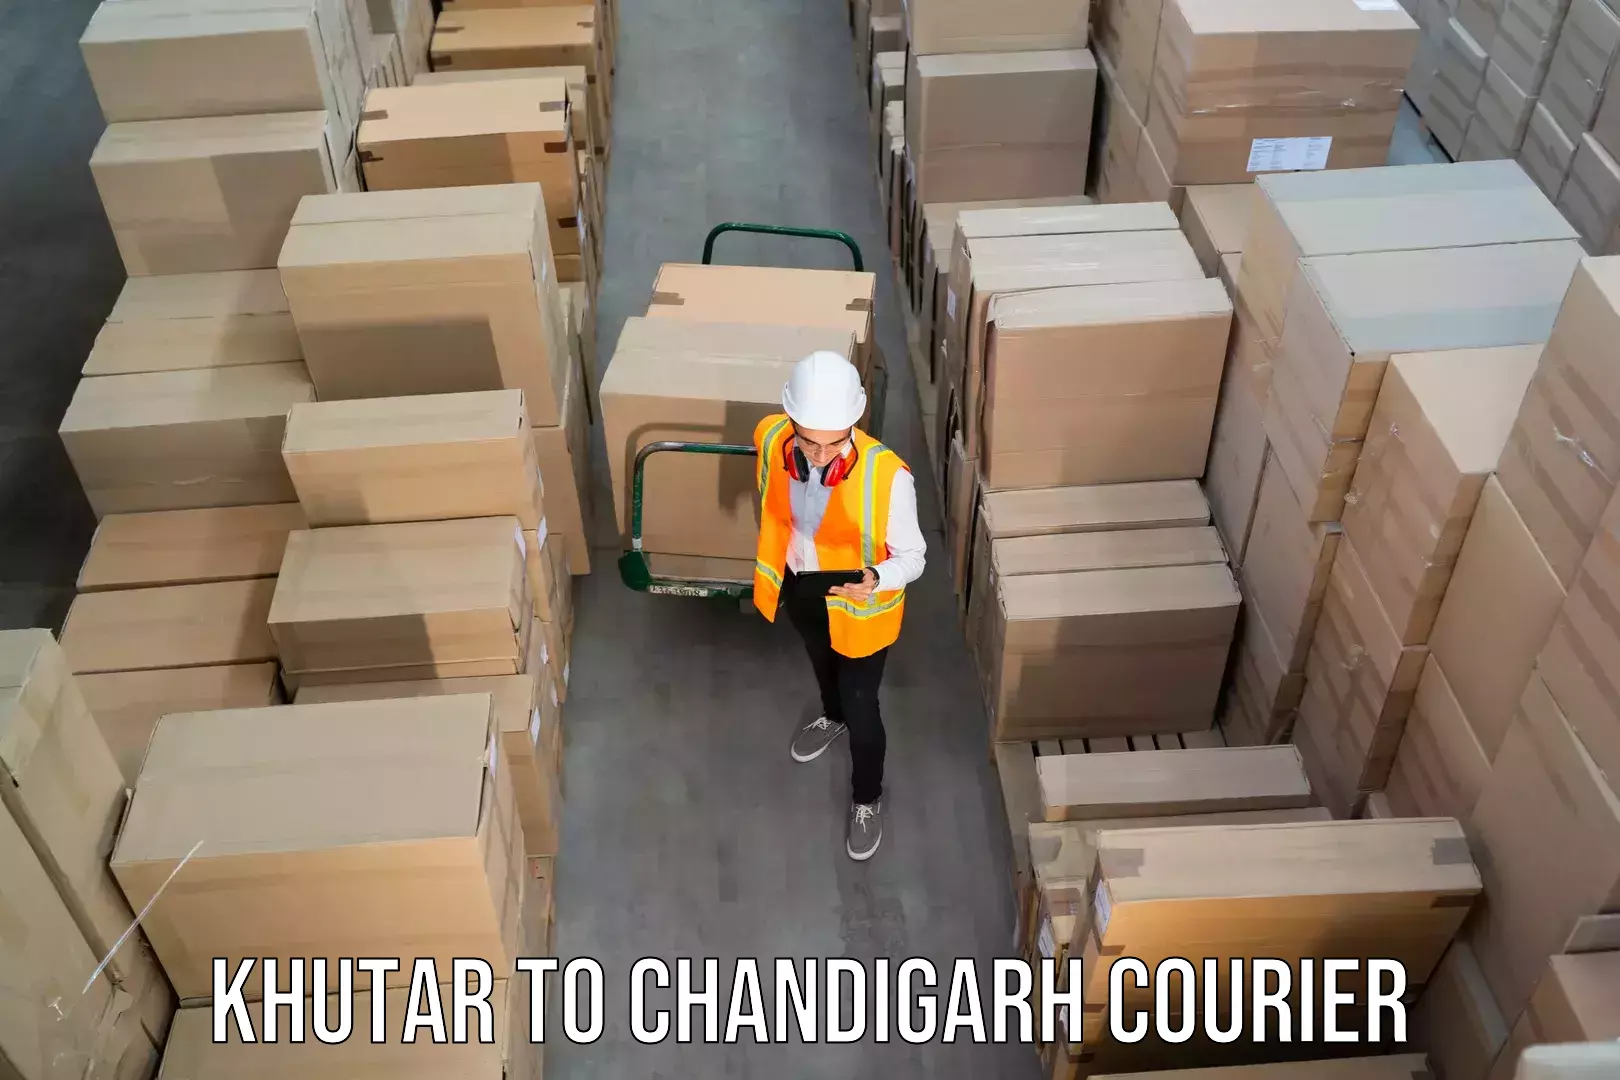 Express package handling Khutar to Chandigarh